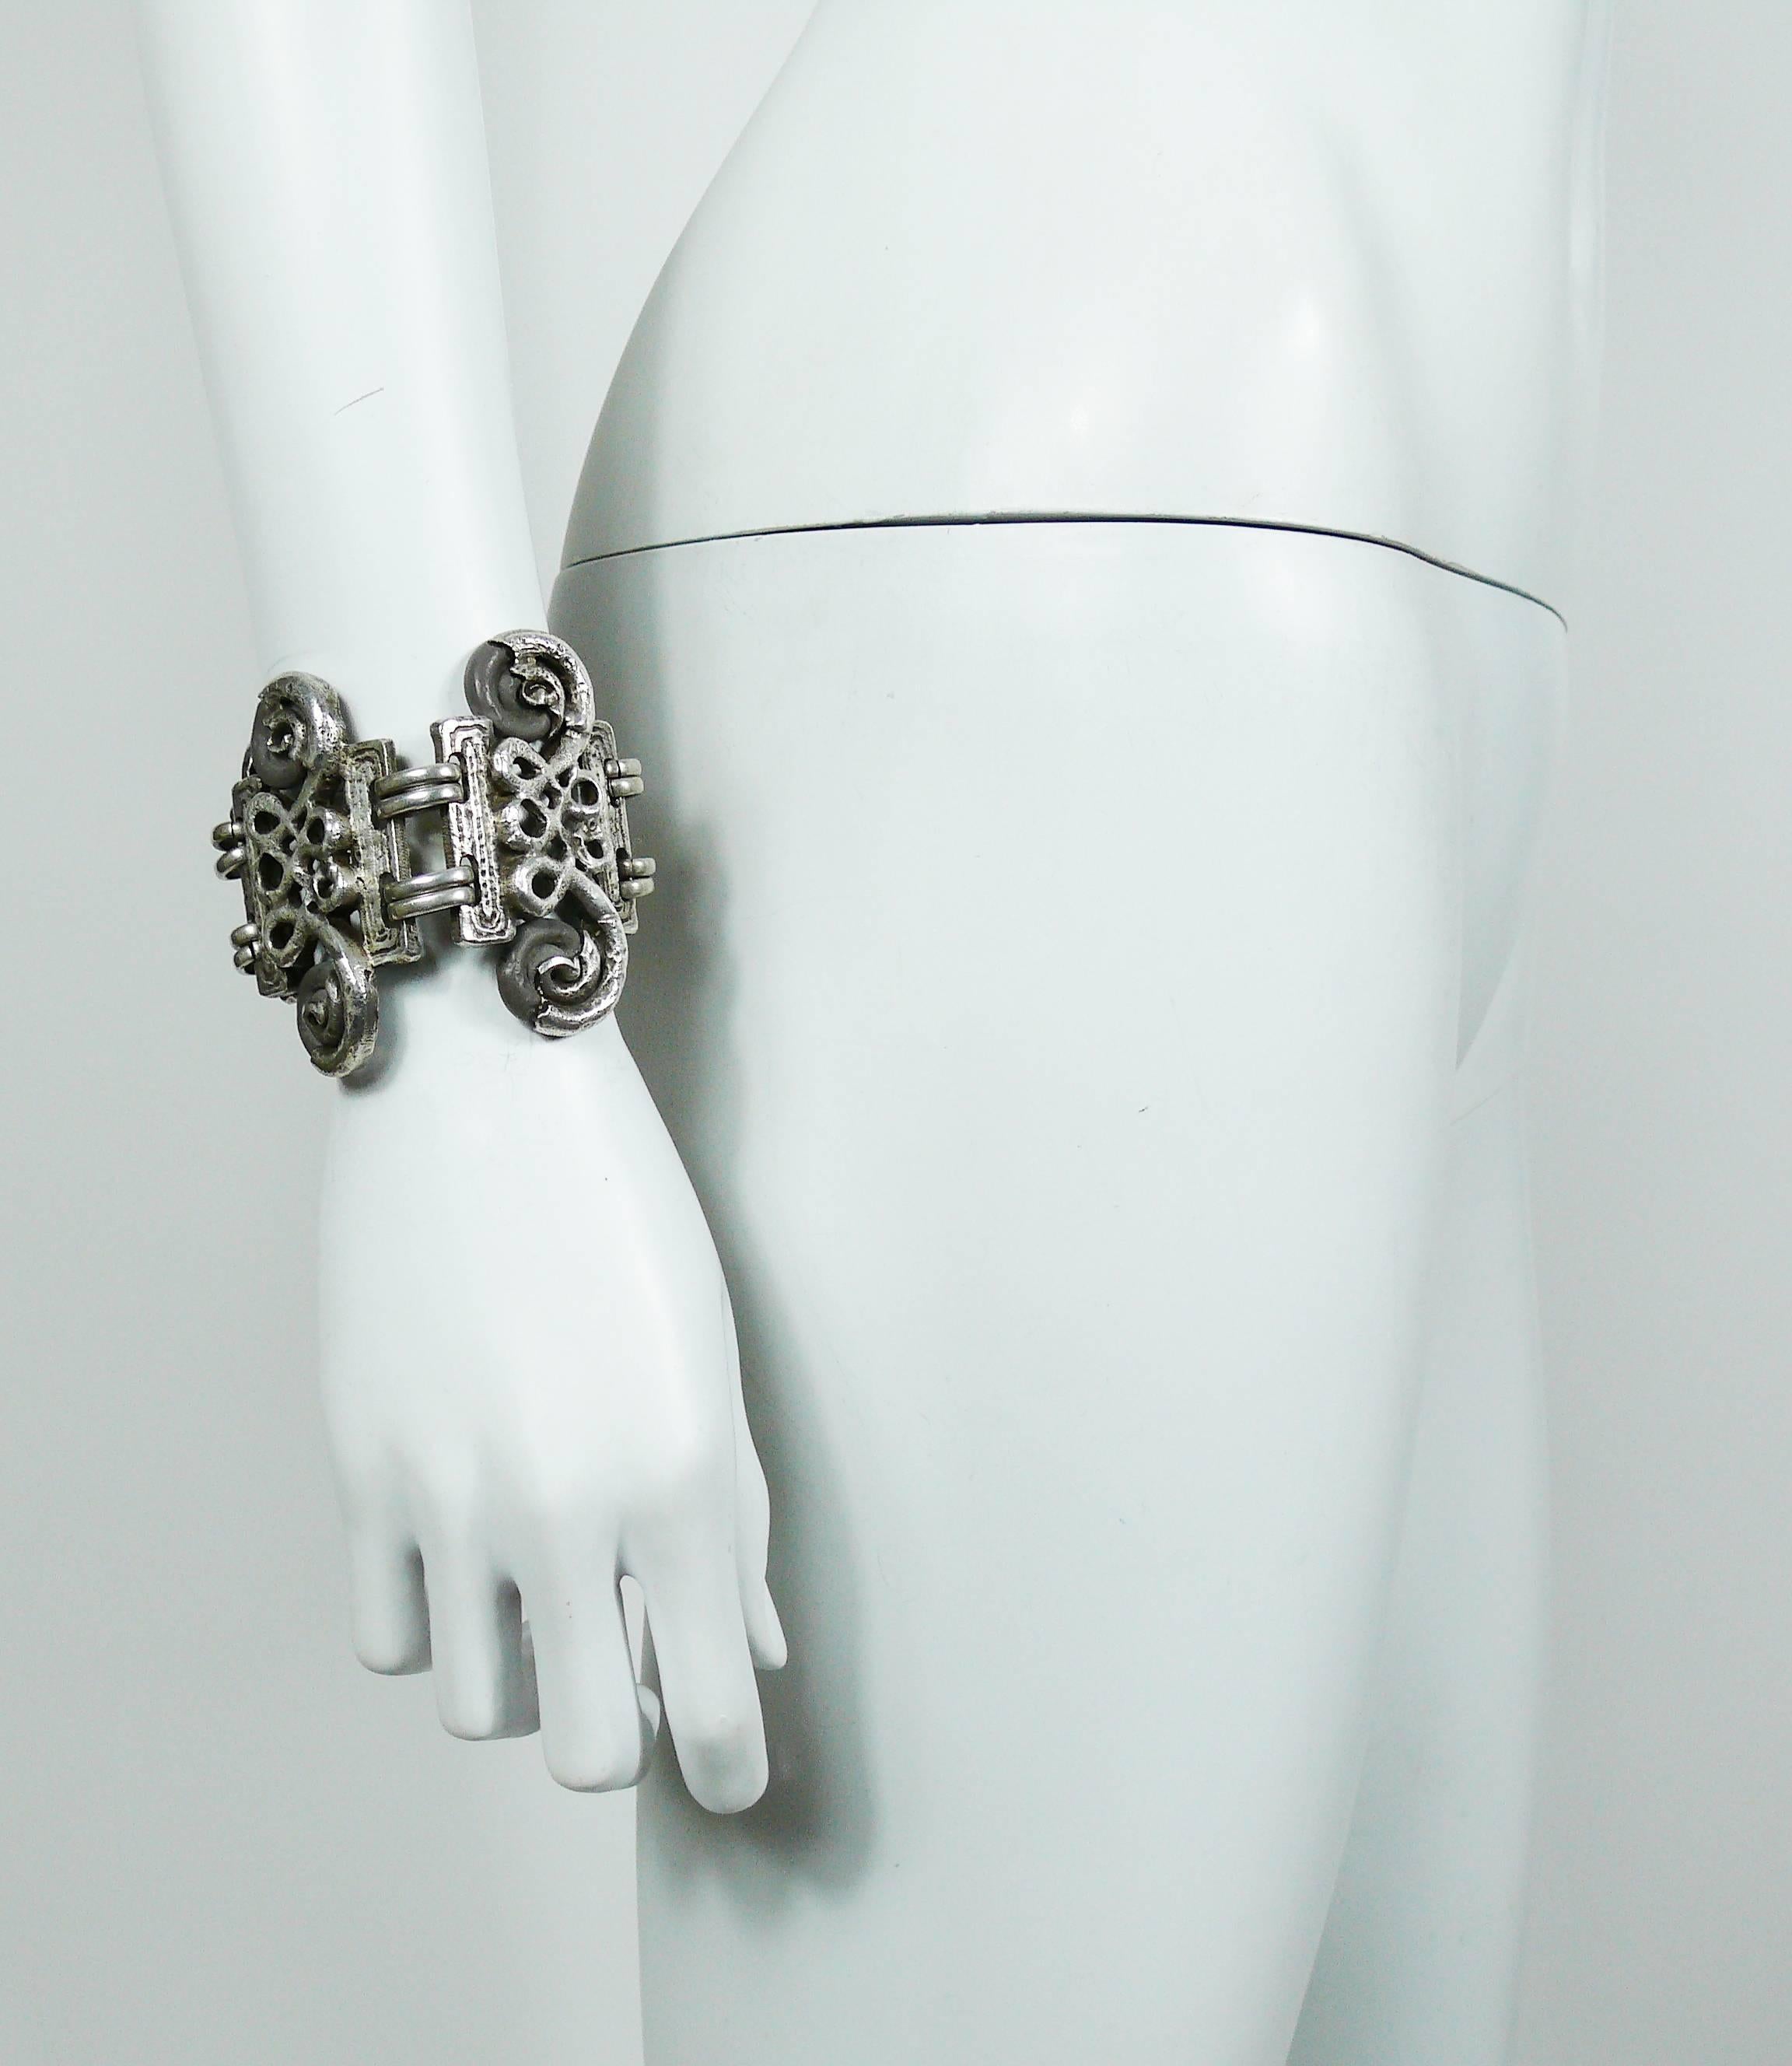 CLAUDE MONTANA vintage antiqued silver tone cuff bracelet featuring arabesque design links embellished with grey resin cabochons.

Created by french jewelry designer CLAIRE DEVE.

Marked CLAUDE MONTANA pour CLAIRE DEVE.

Indicative measurements :